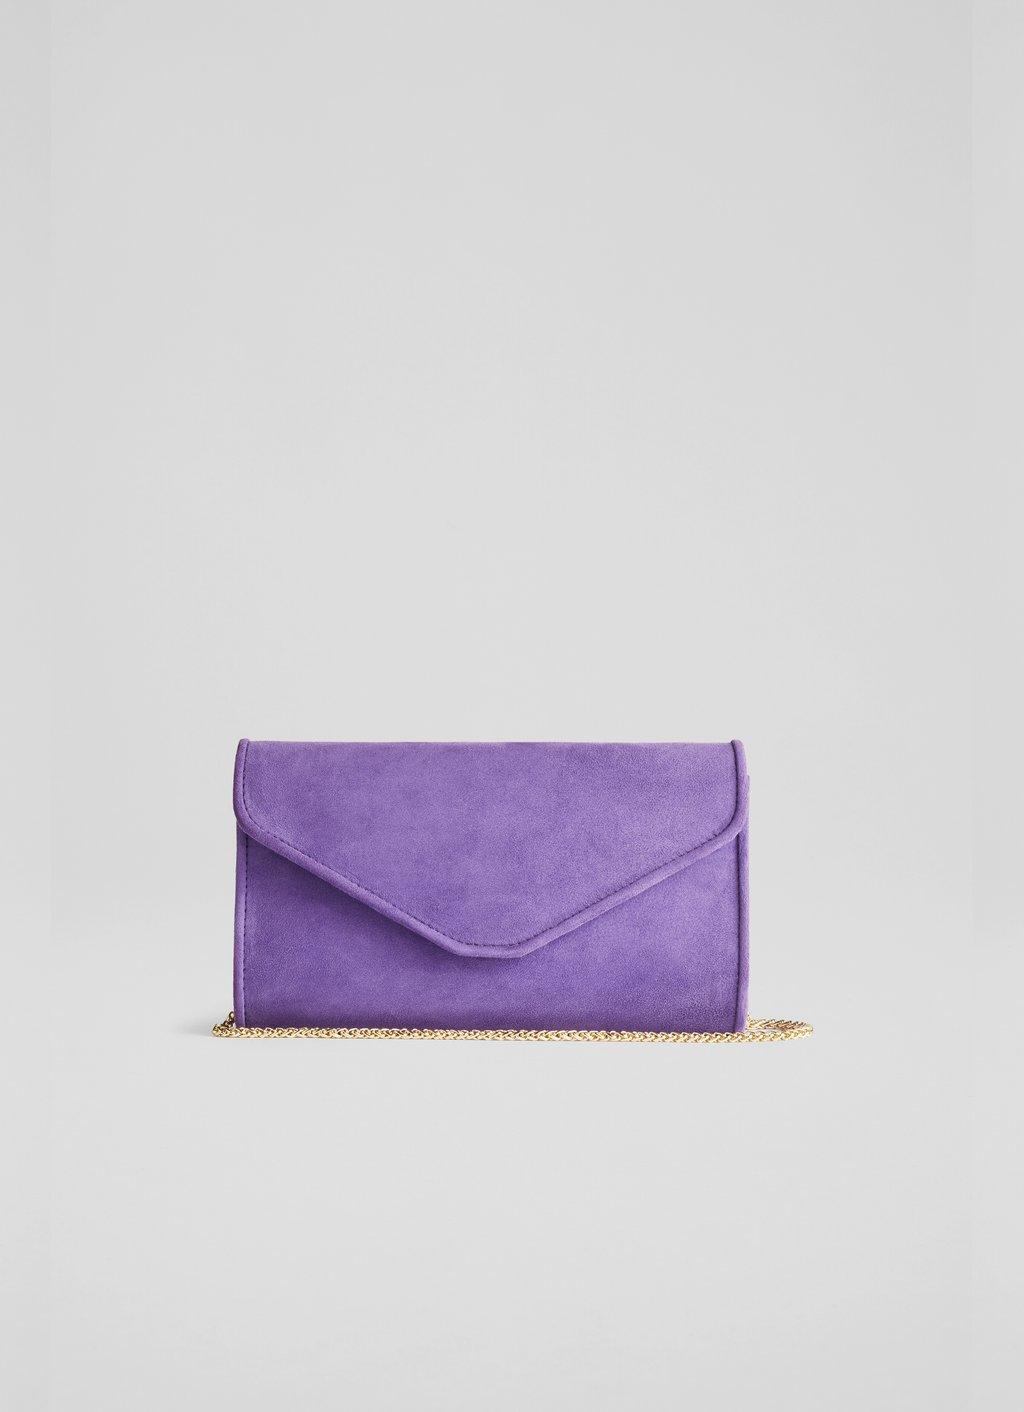 Wedding Guest Clutch Bags Ladies Cheap Party Purses Small Evening Bag for  Women Purple Clutch Purse